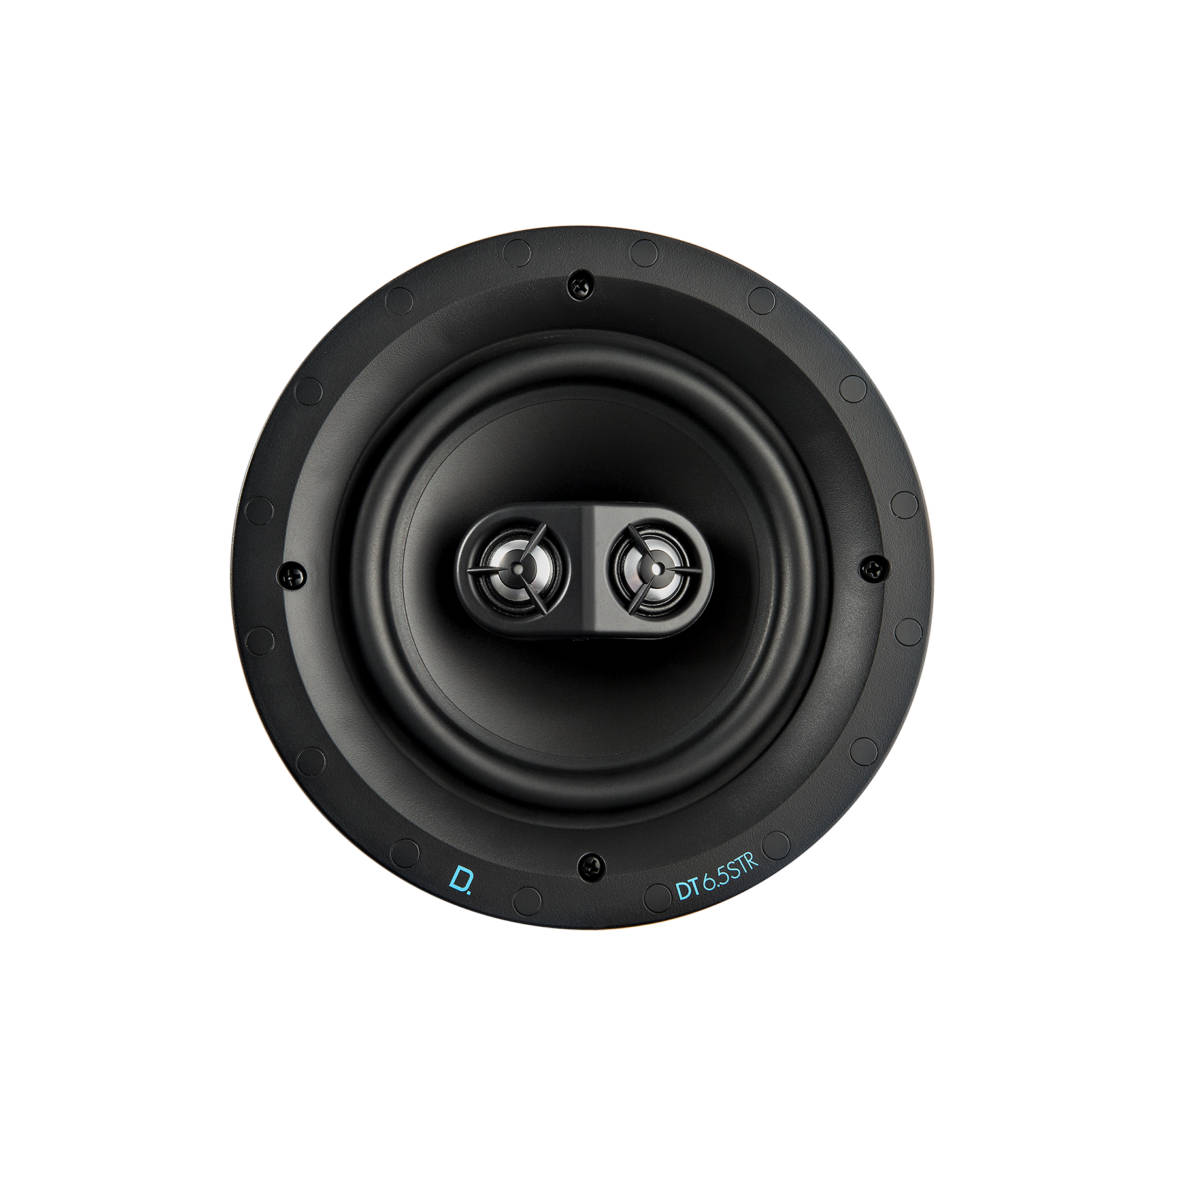 Definitive Technology DT 6.5 STR DT Series Round 6.5" Single Stereo In-Ceiling Speaker (Each) - Ooberpad India